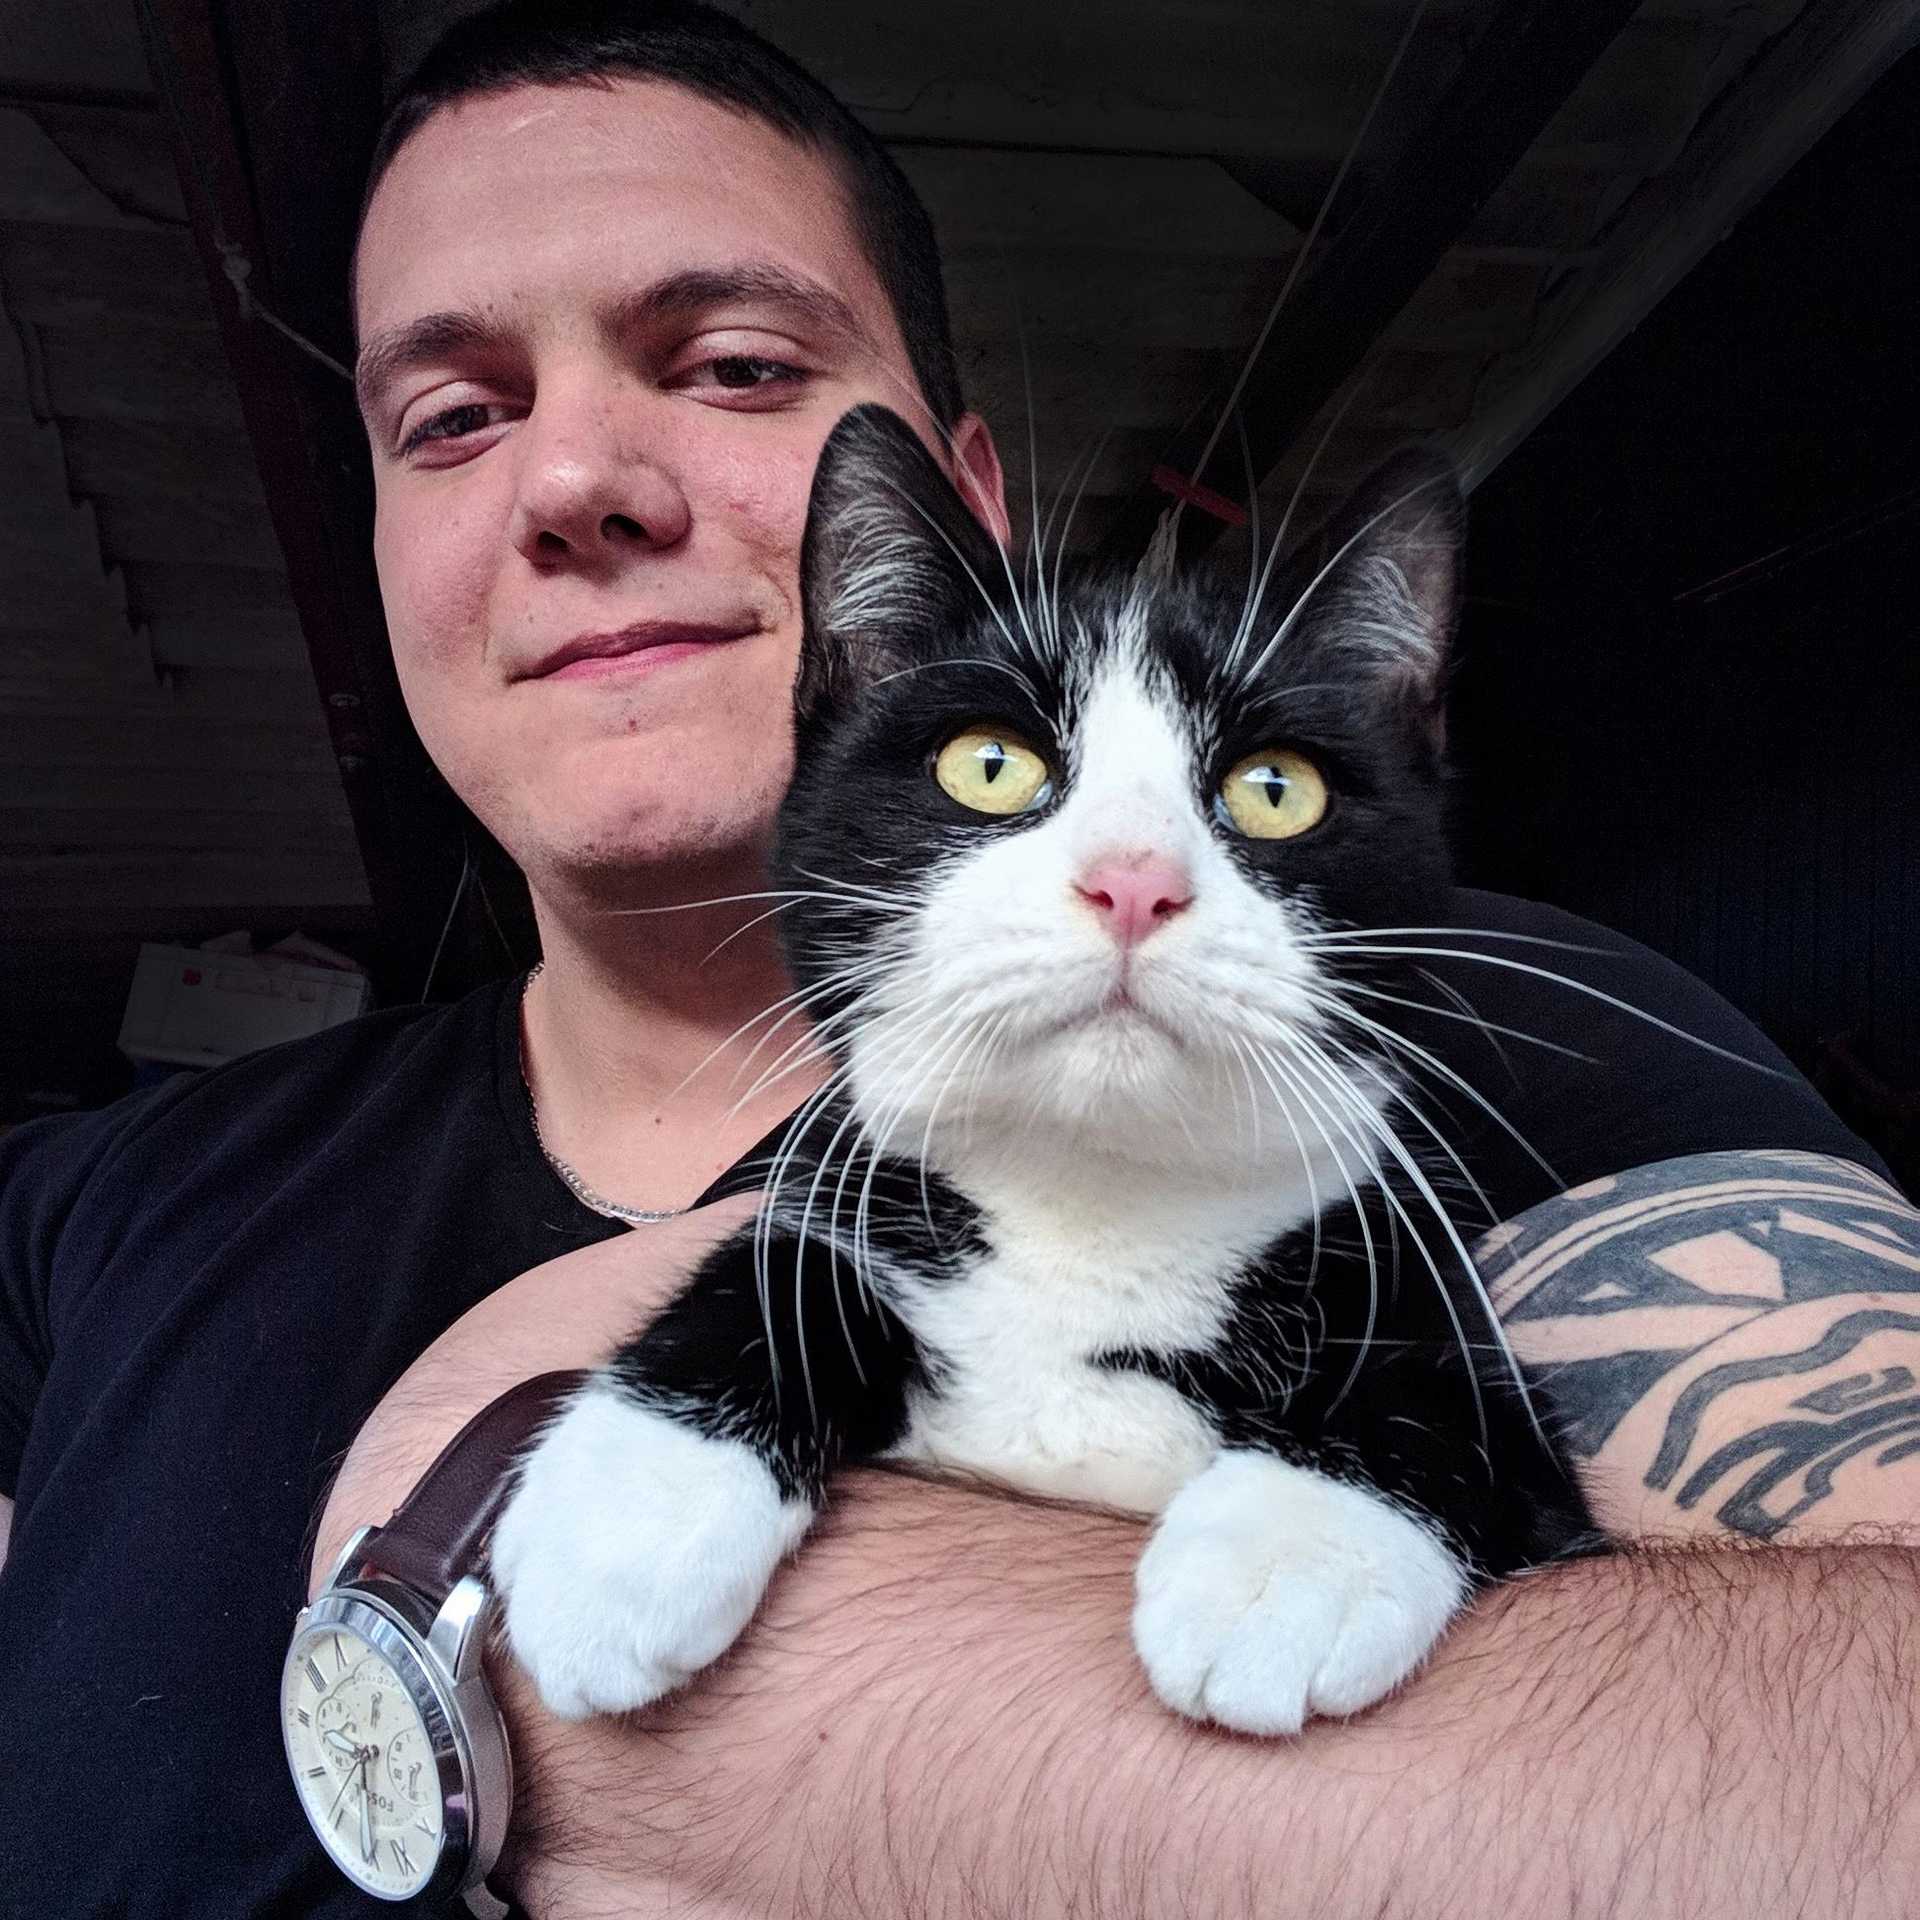 Ratko and his cat Cile